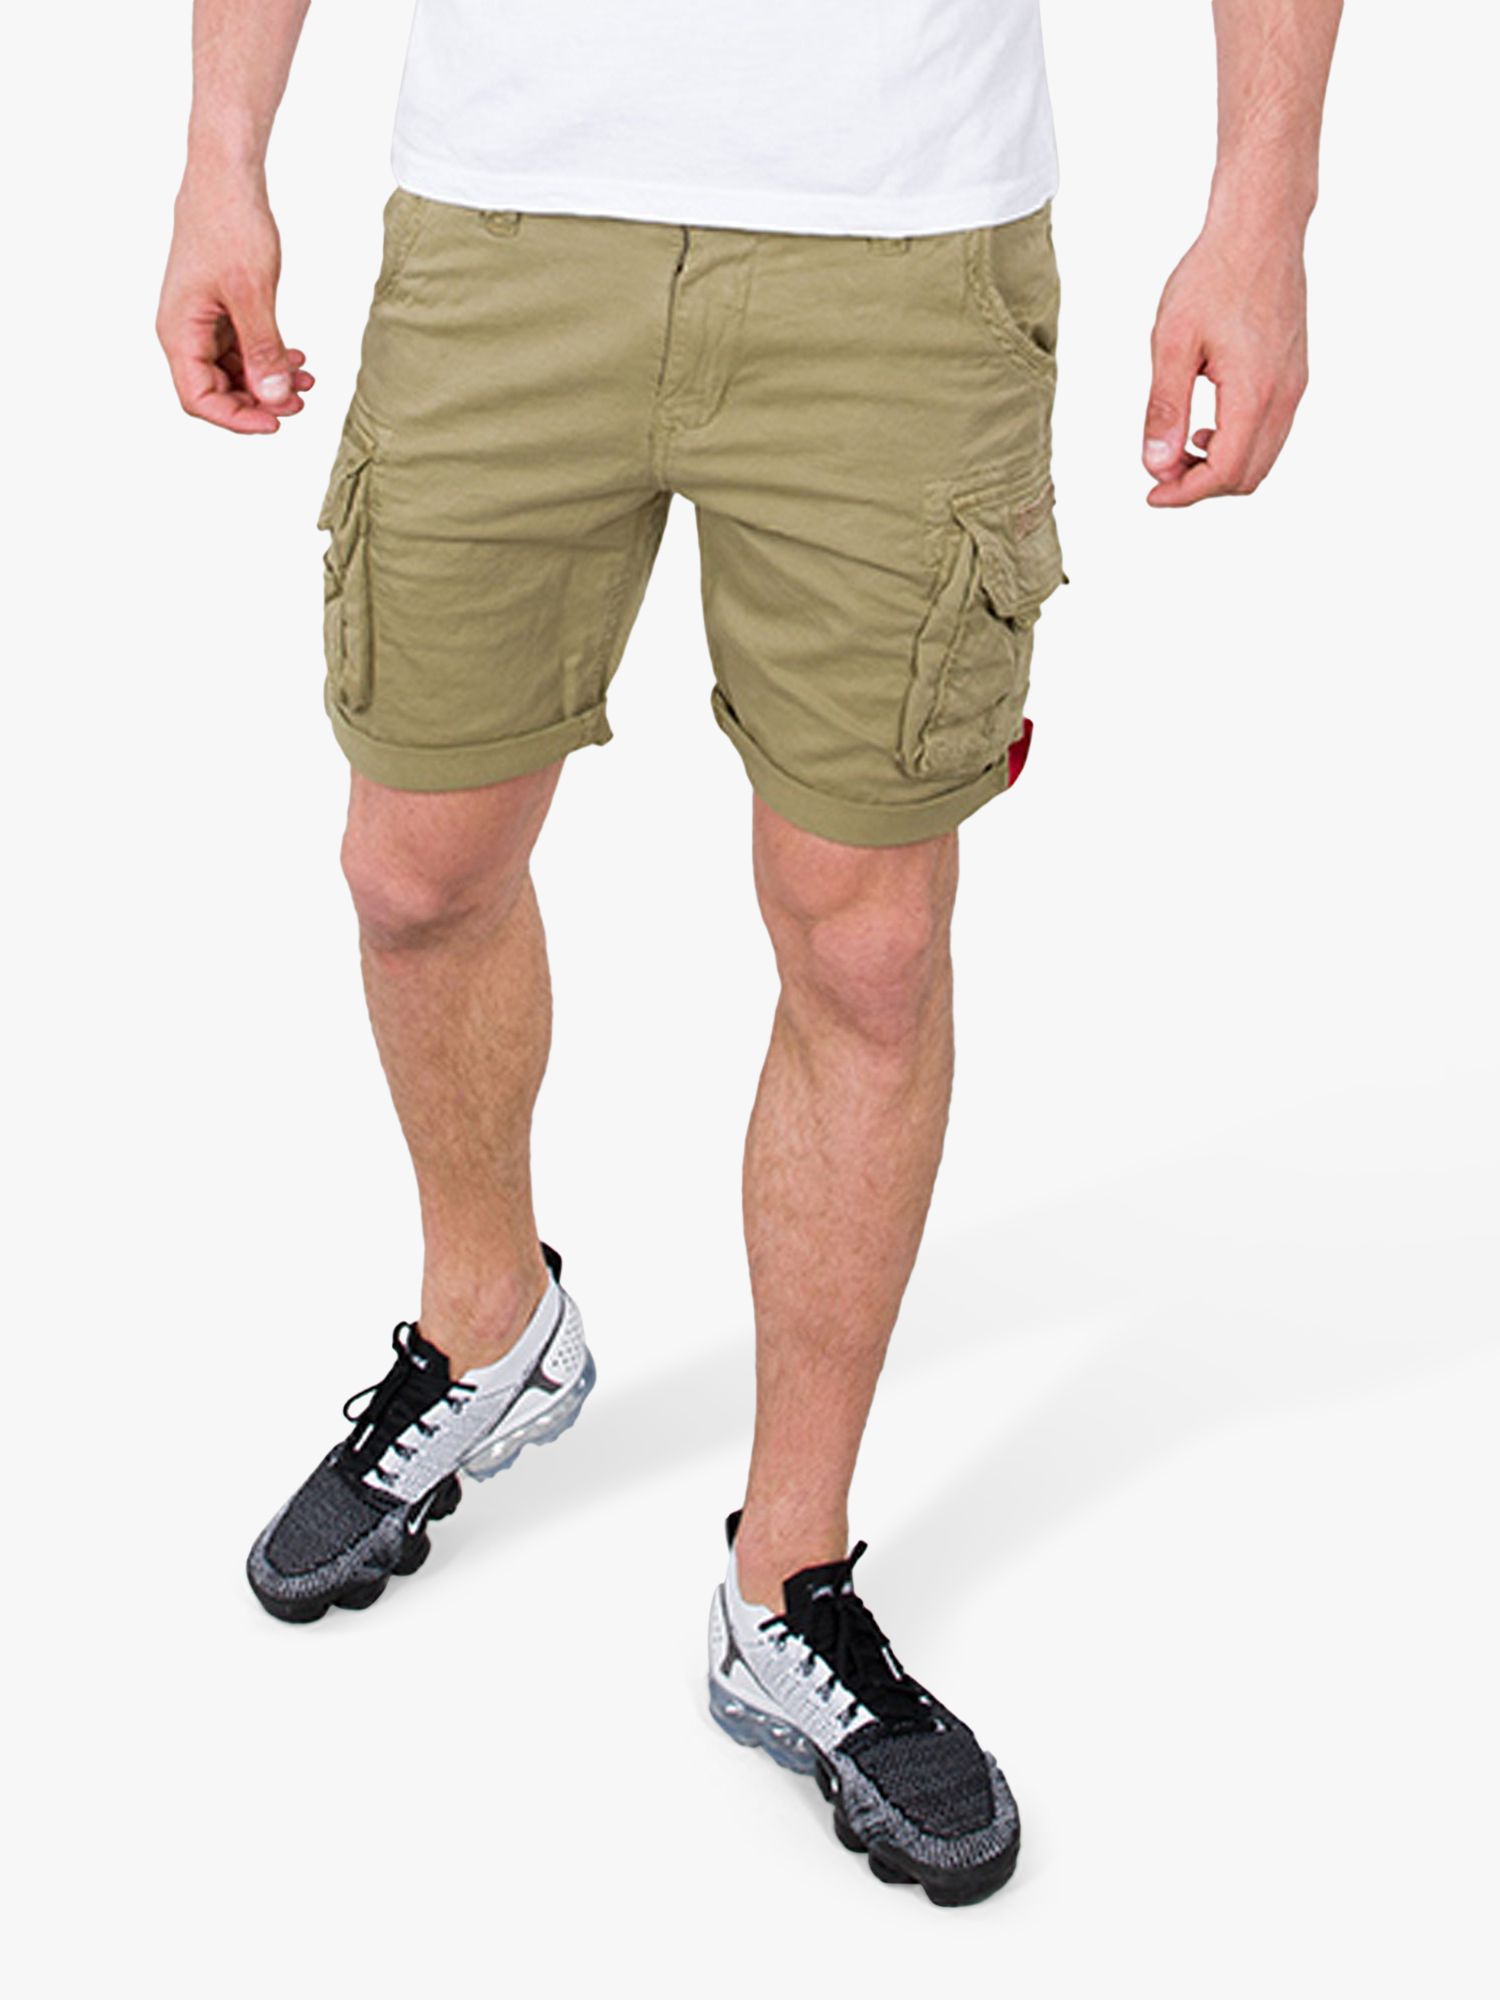 Alpha Industries Lewis John at Olive Light Partners Cargo 82 & Shorts, Crew